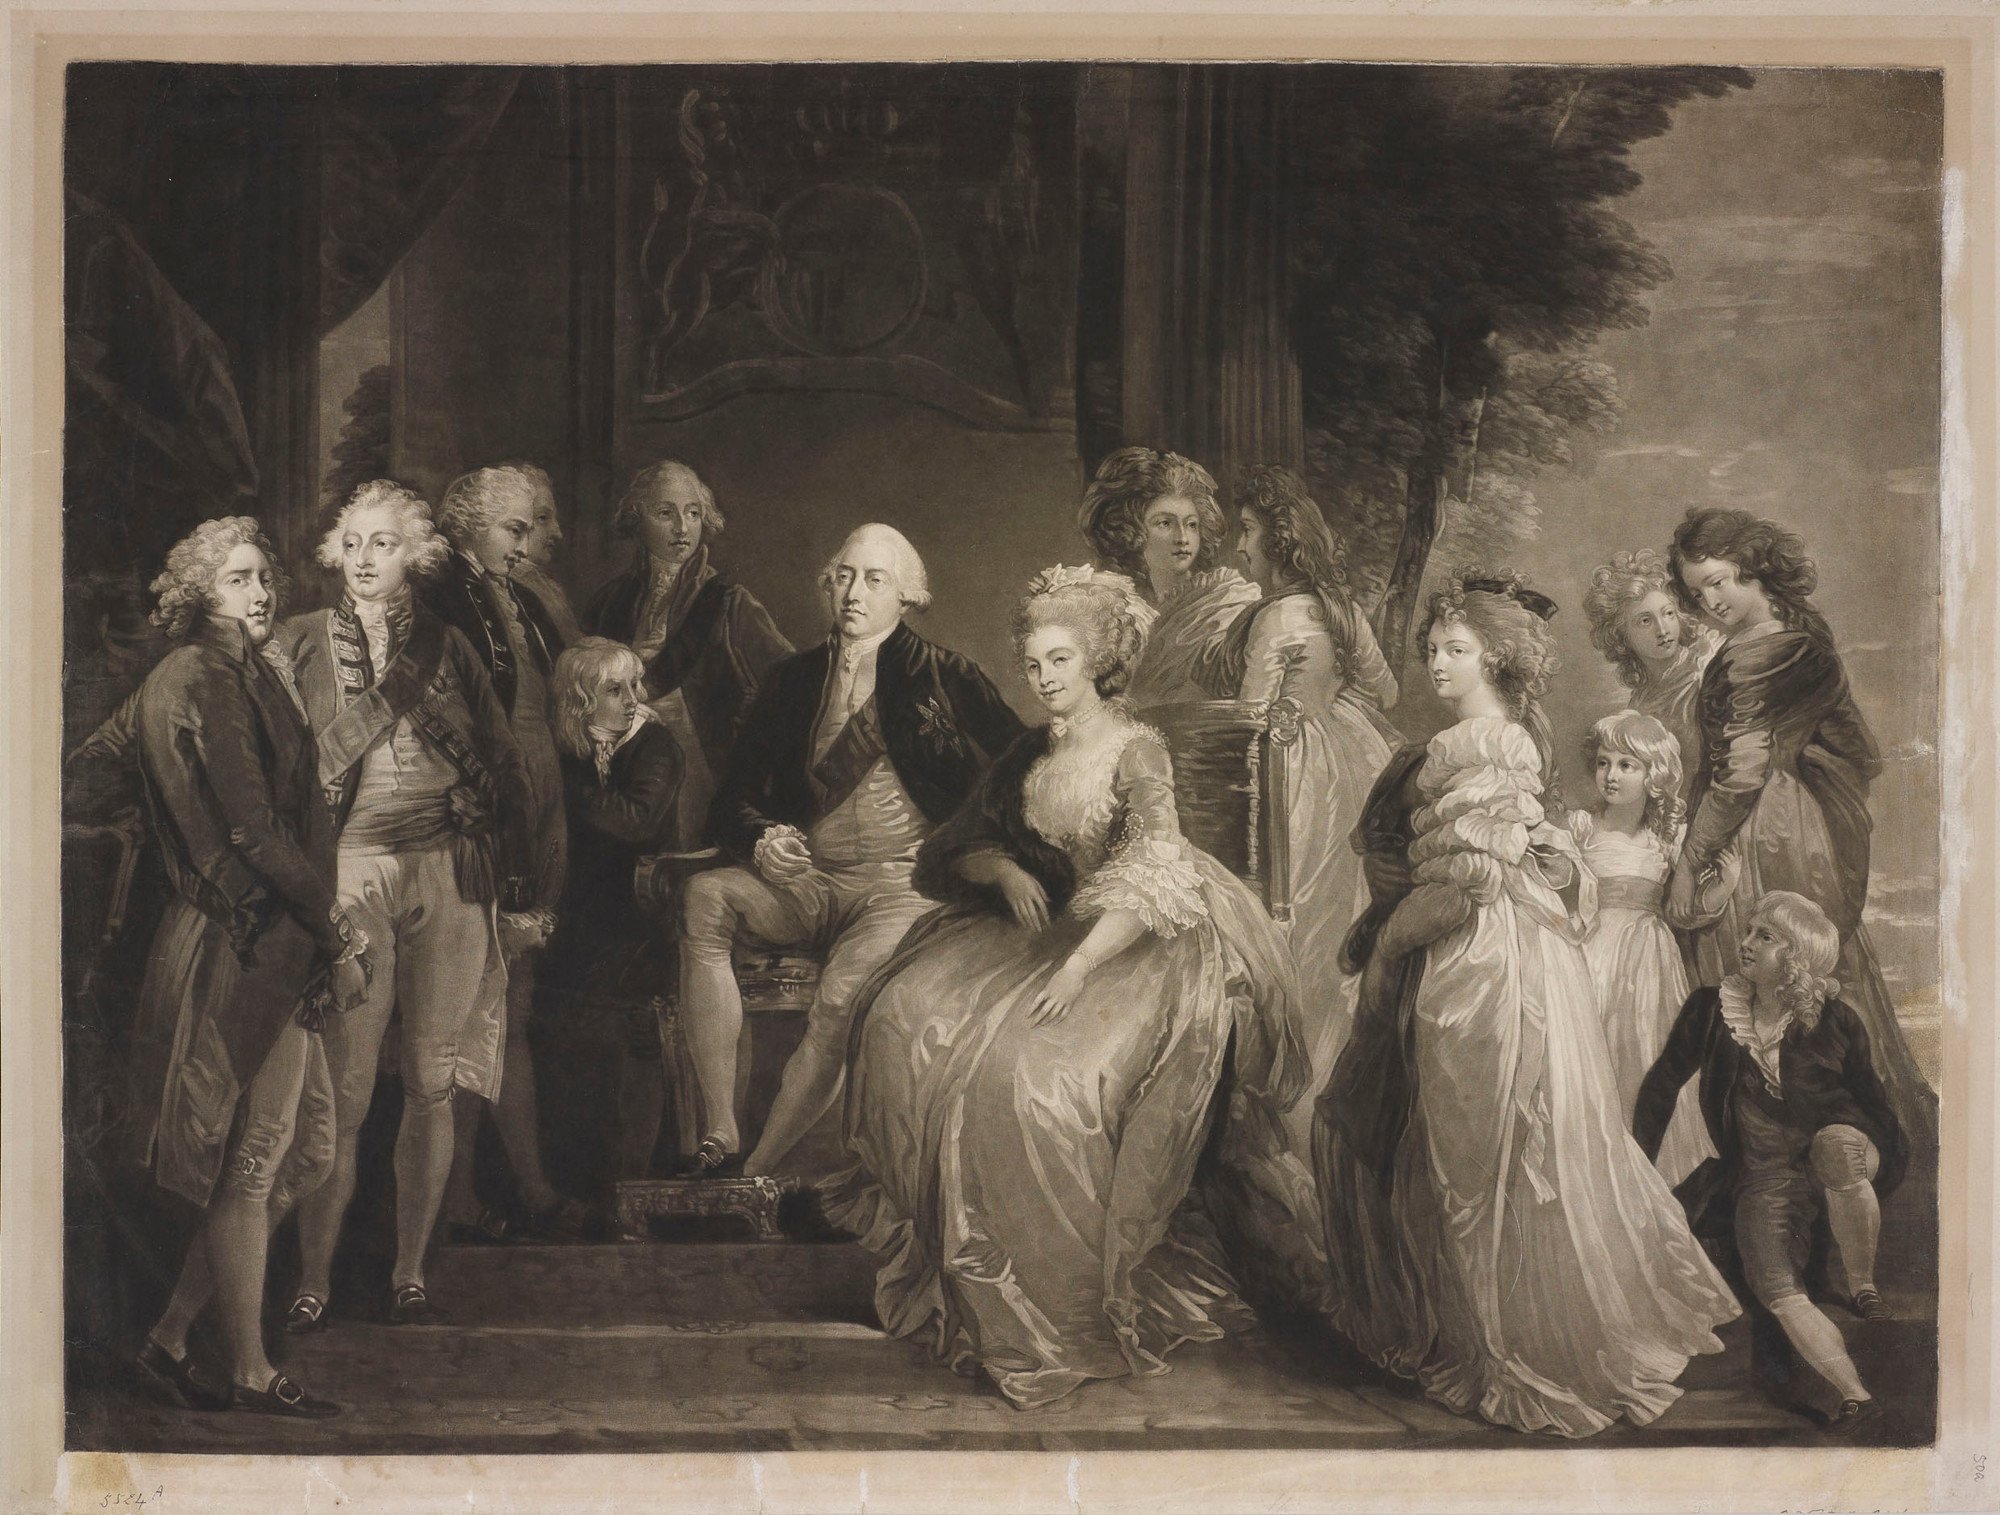 George III and Queen Charlotte With Their 13 Children by John Murphy (1794). Image: Royal Collection